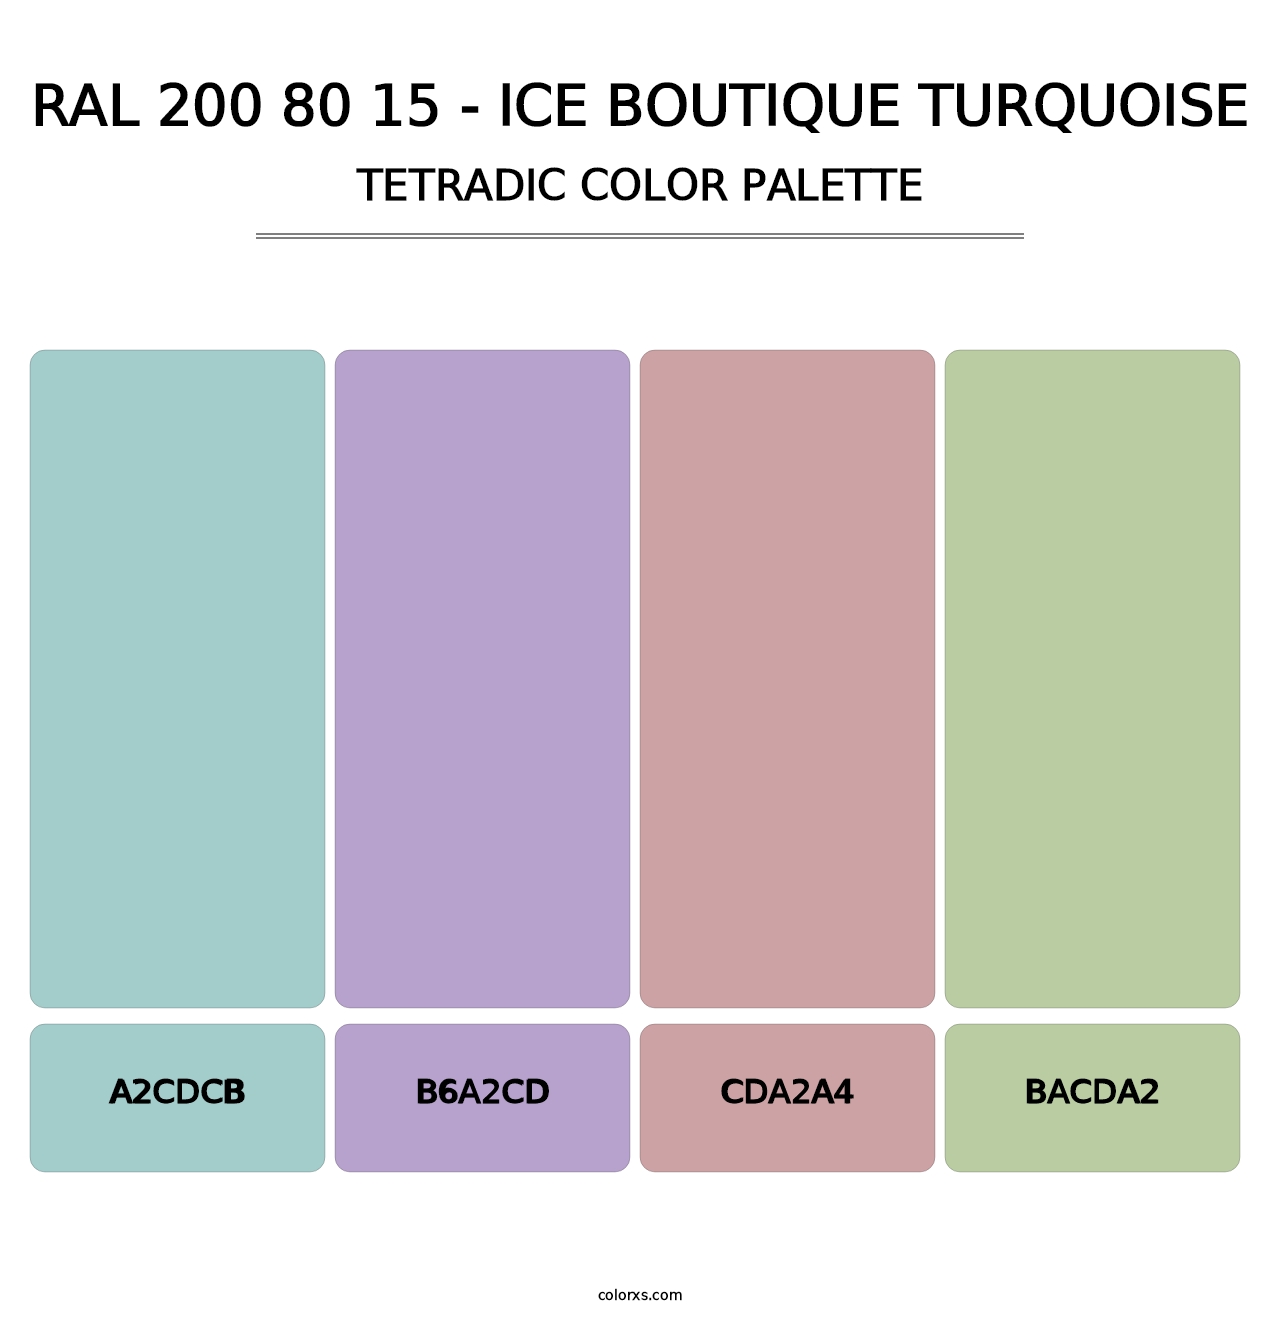 RAL 200 80 15 - Ice Boutique Turquoise - Tetradic Color Palette